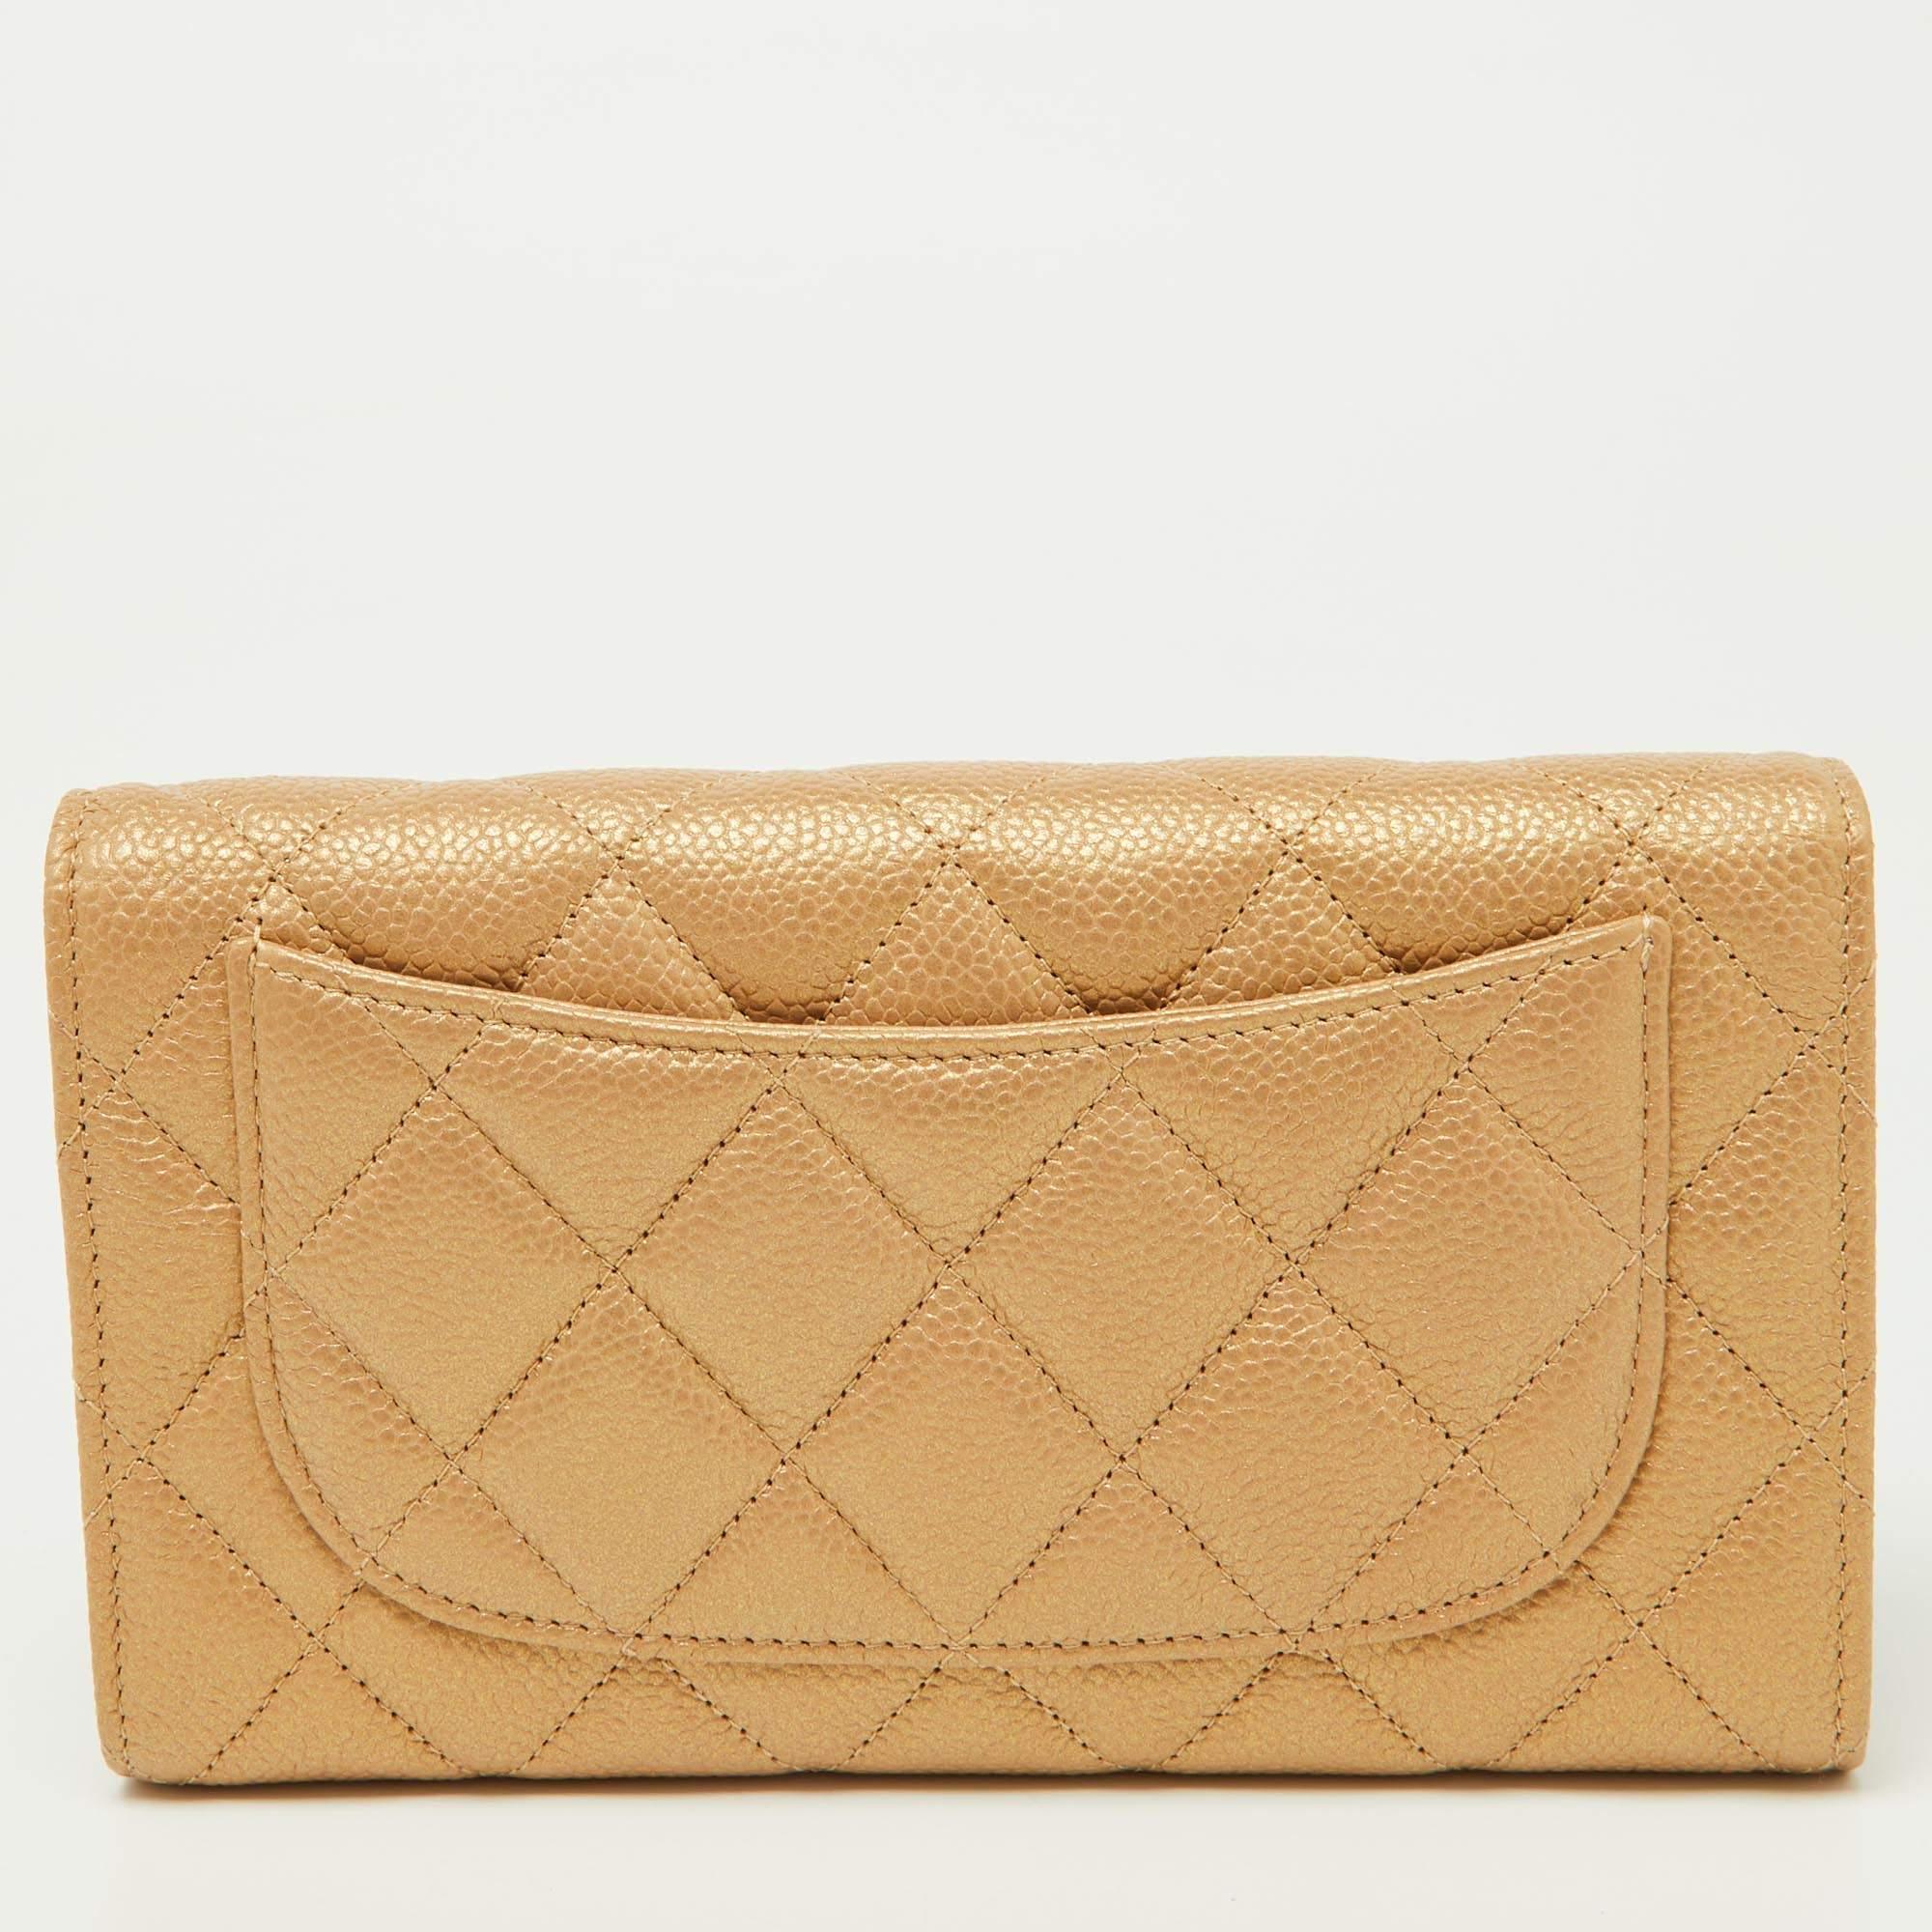 Chanel brings you a chic wallet with the look of a classic flap bag. It is made of caviar leather with a flap and a rear patch pocket. This piece is accented with quilted stitching and a CC snap for closure. The leather-lined interior has credit